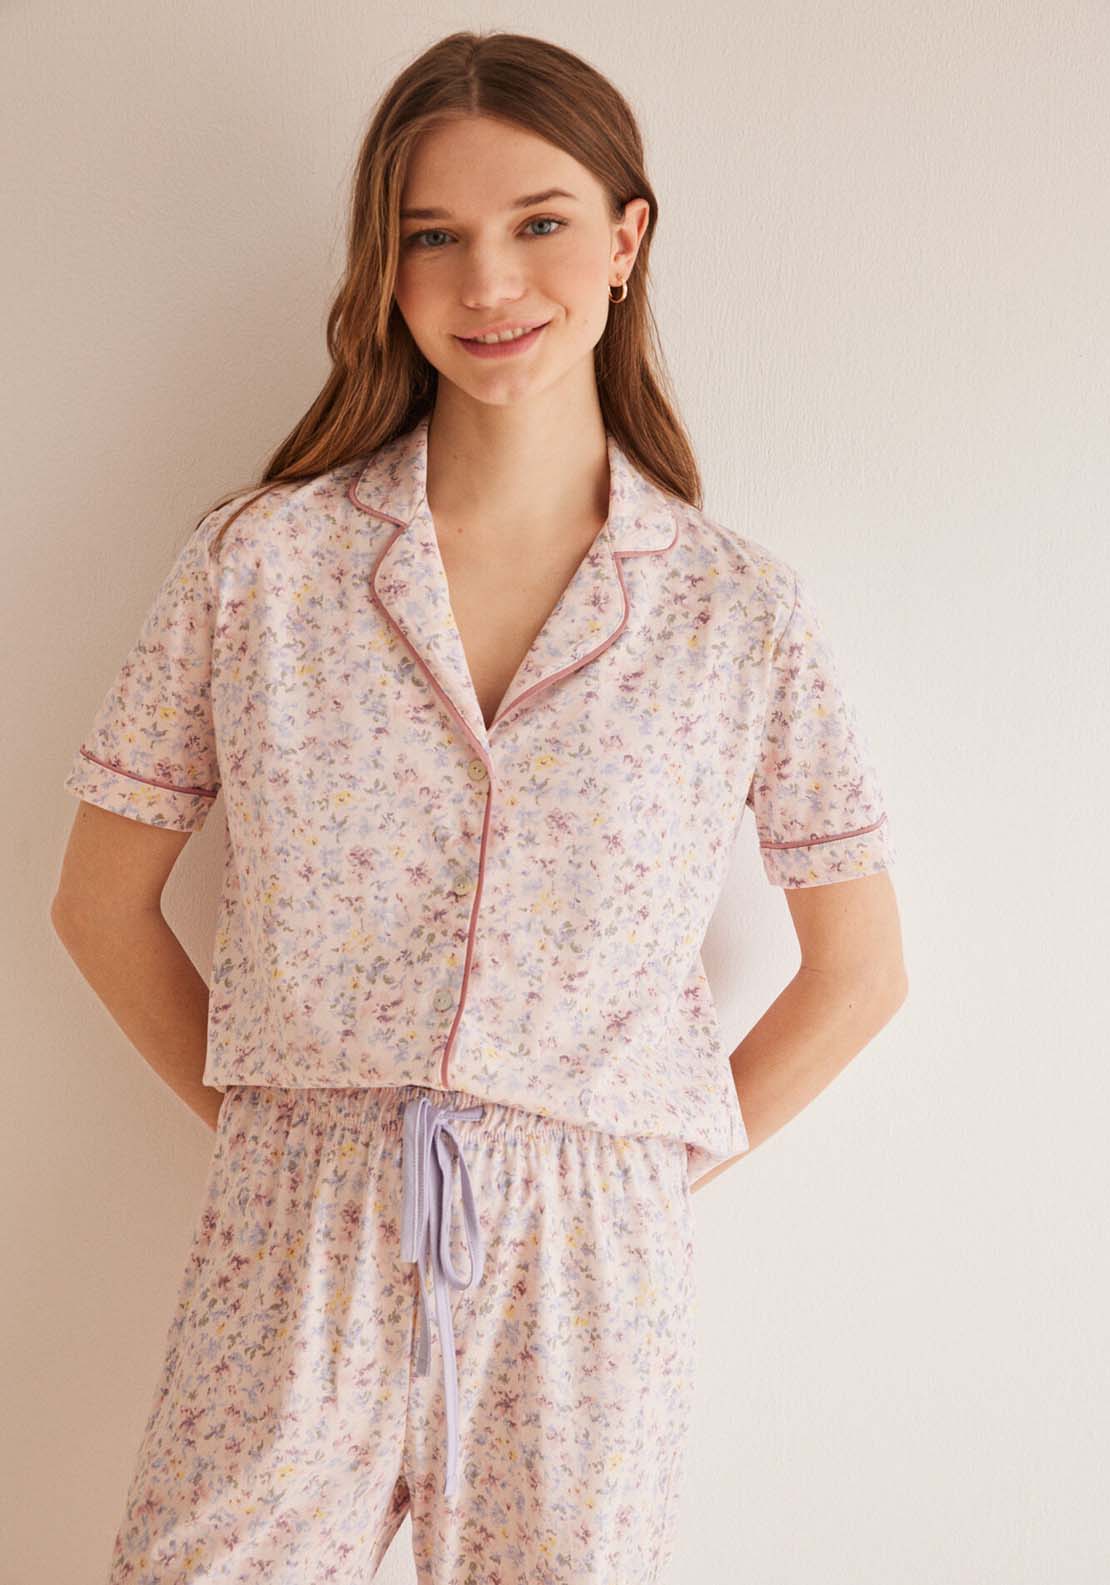 Buy All-Over Floral Print Night Gown with Short Sleeves